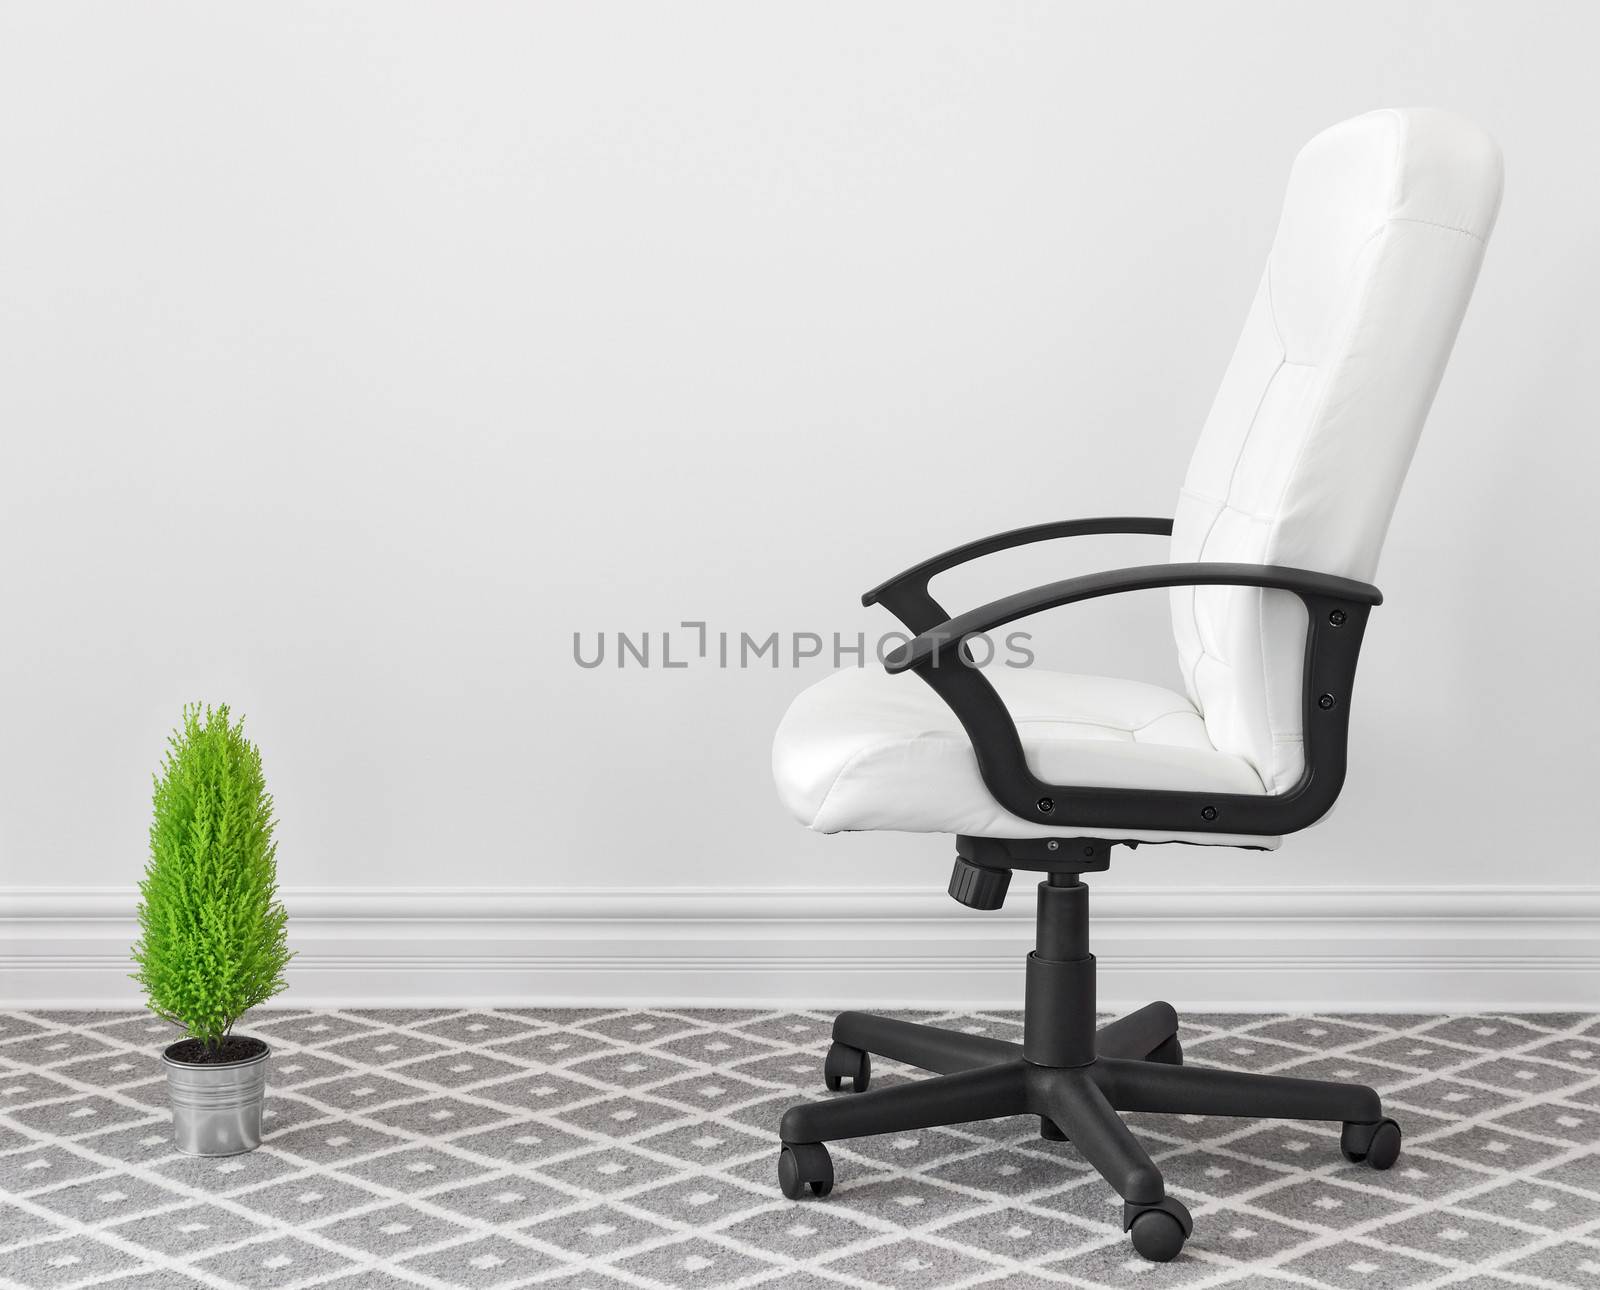 Computer chair and green plant at home or in the office.